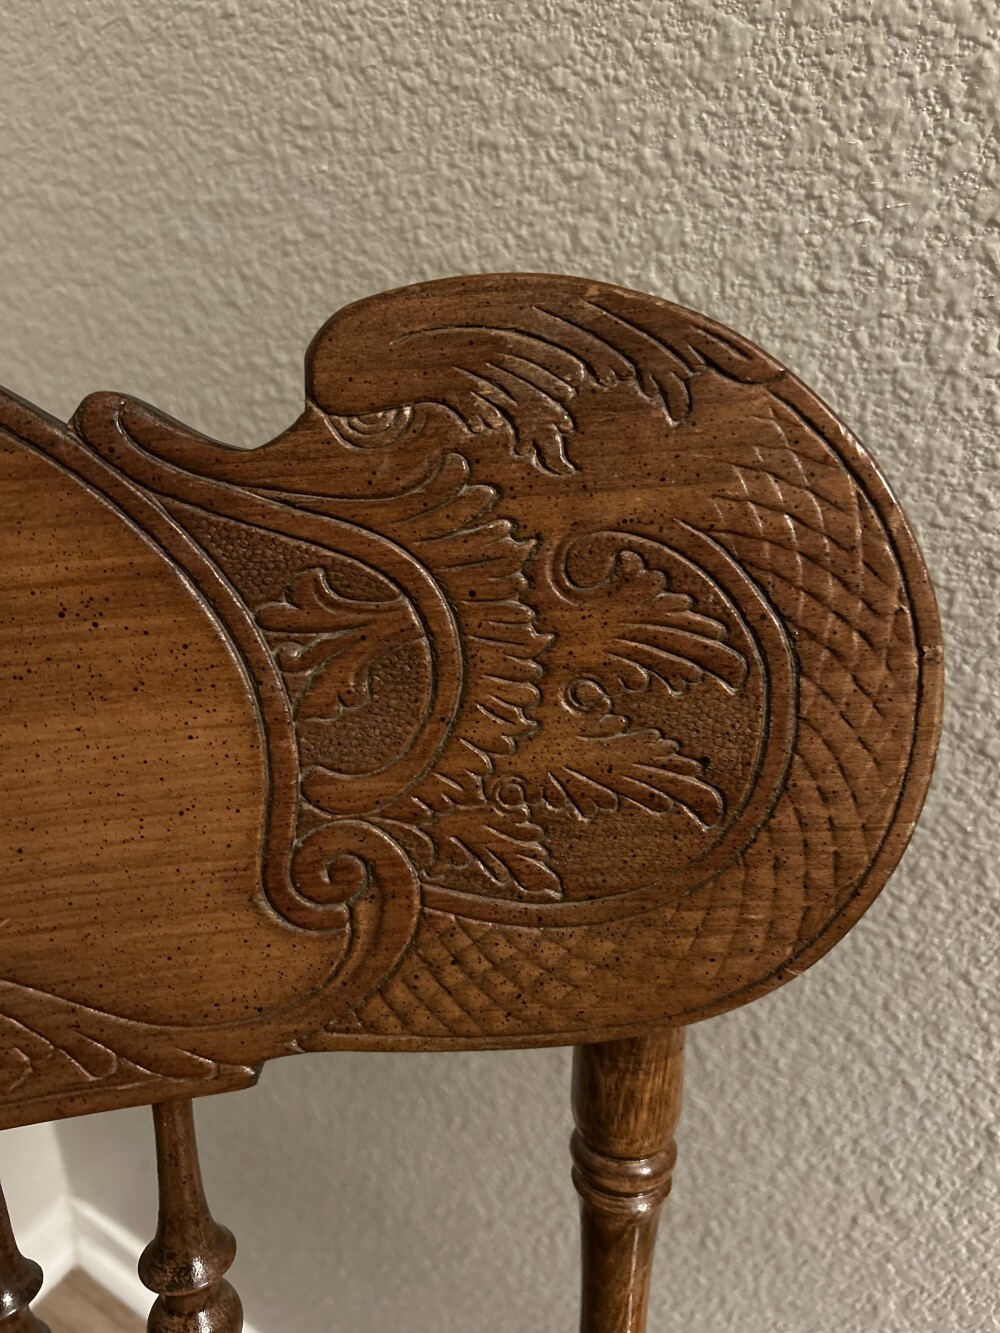 relief-carved detail of a dragon or seahorse-like creature in the head-rest board of the rocking chair.